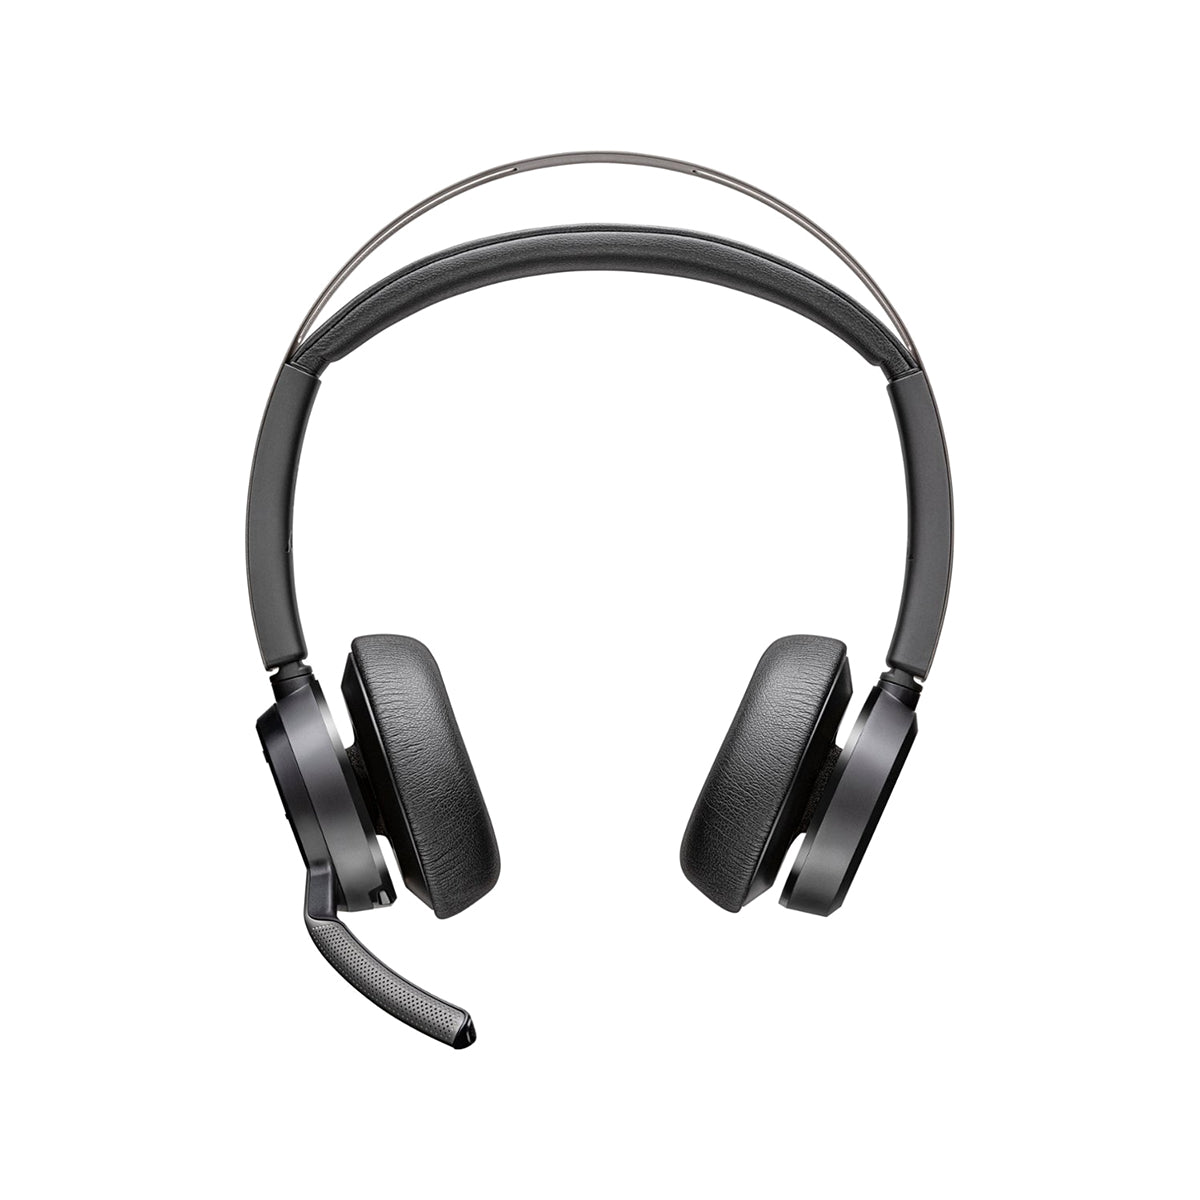 Poly Voyager Focus 2 Cordless Headset USB-A/C